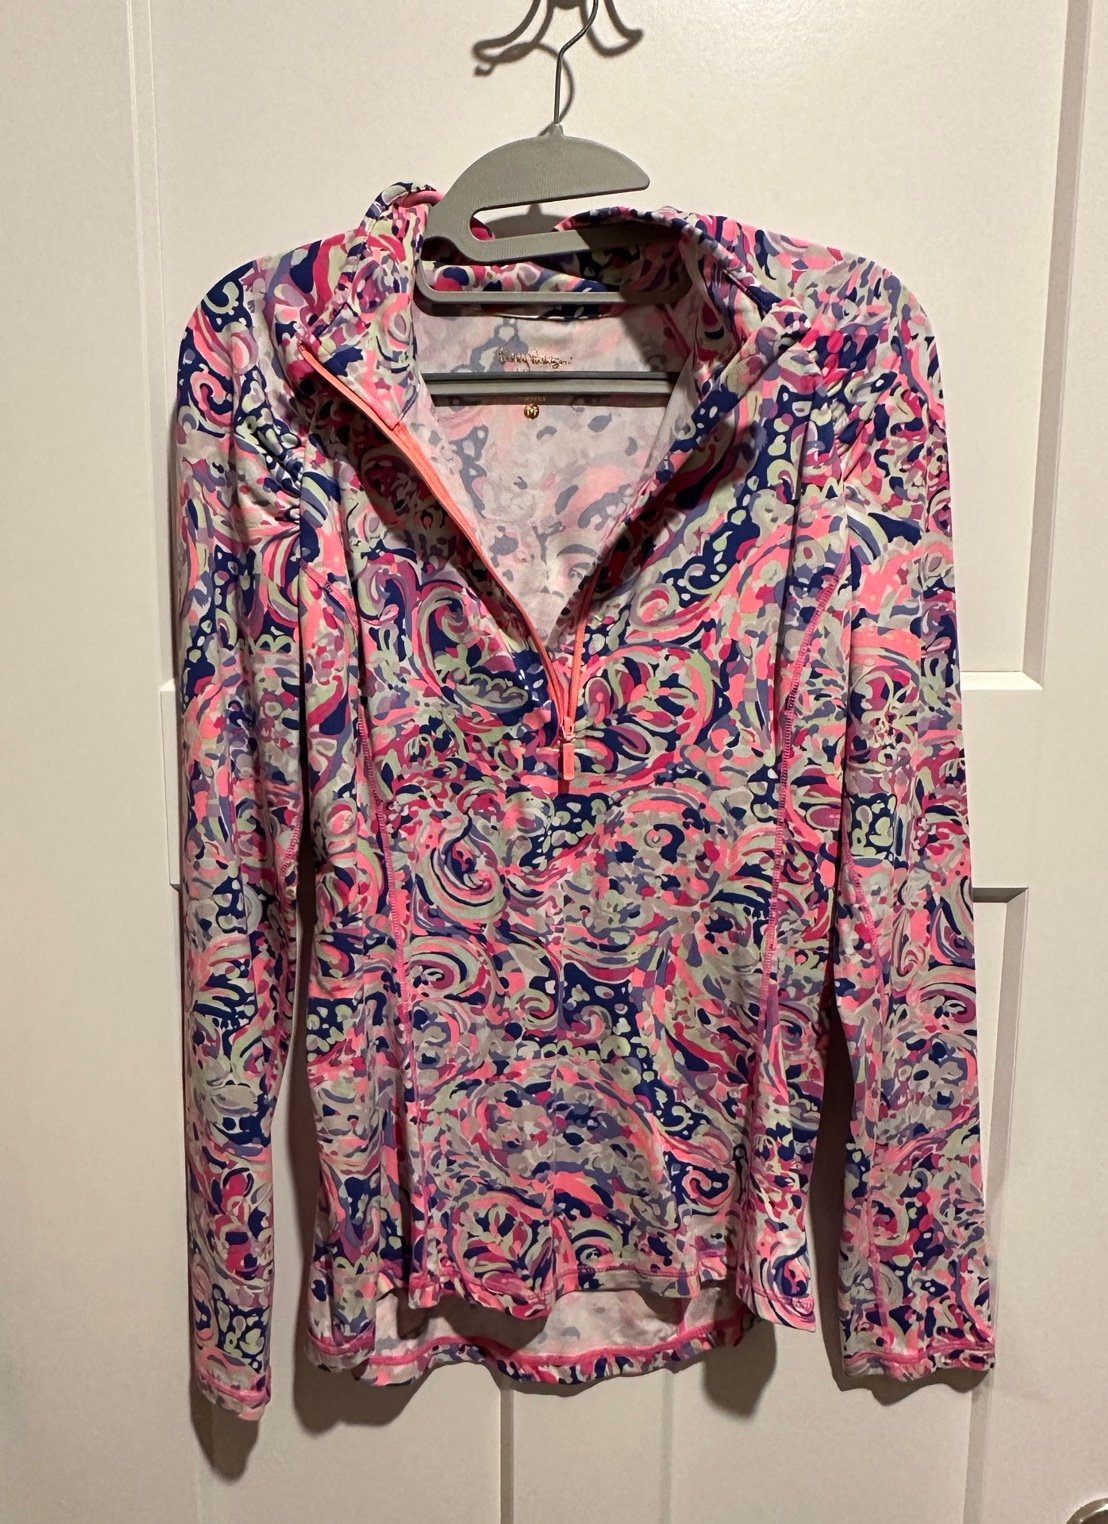 good price Lilly Pulitzer Luxletic OllUL8rz3 Cheap